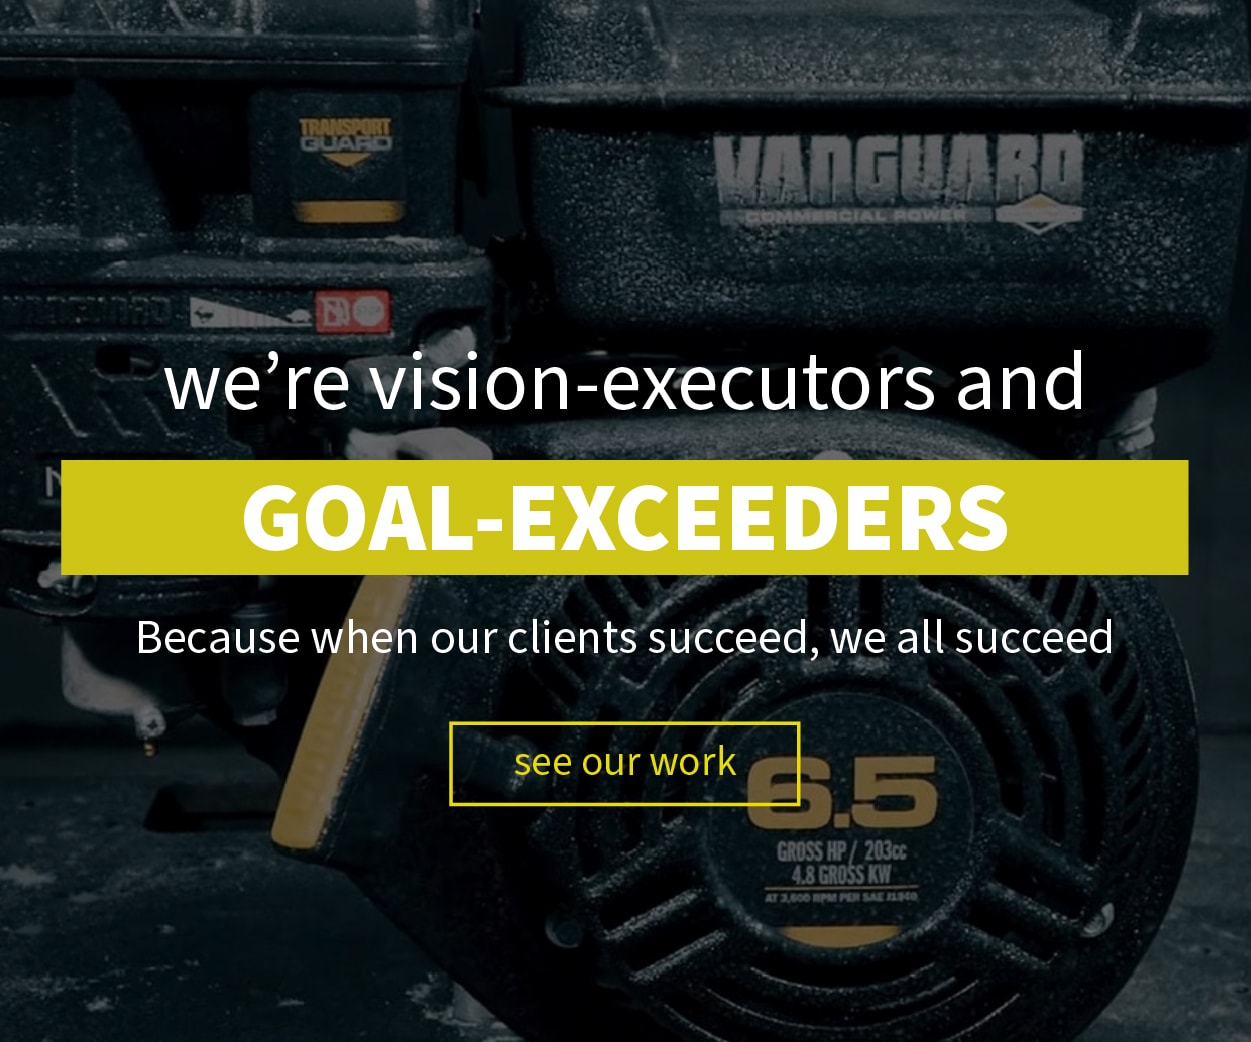 we're vision-executors and GOAL-EXCEEDERS. Because when our clients succeed, we all succeed.